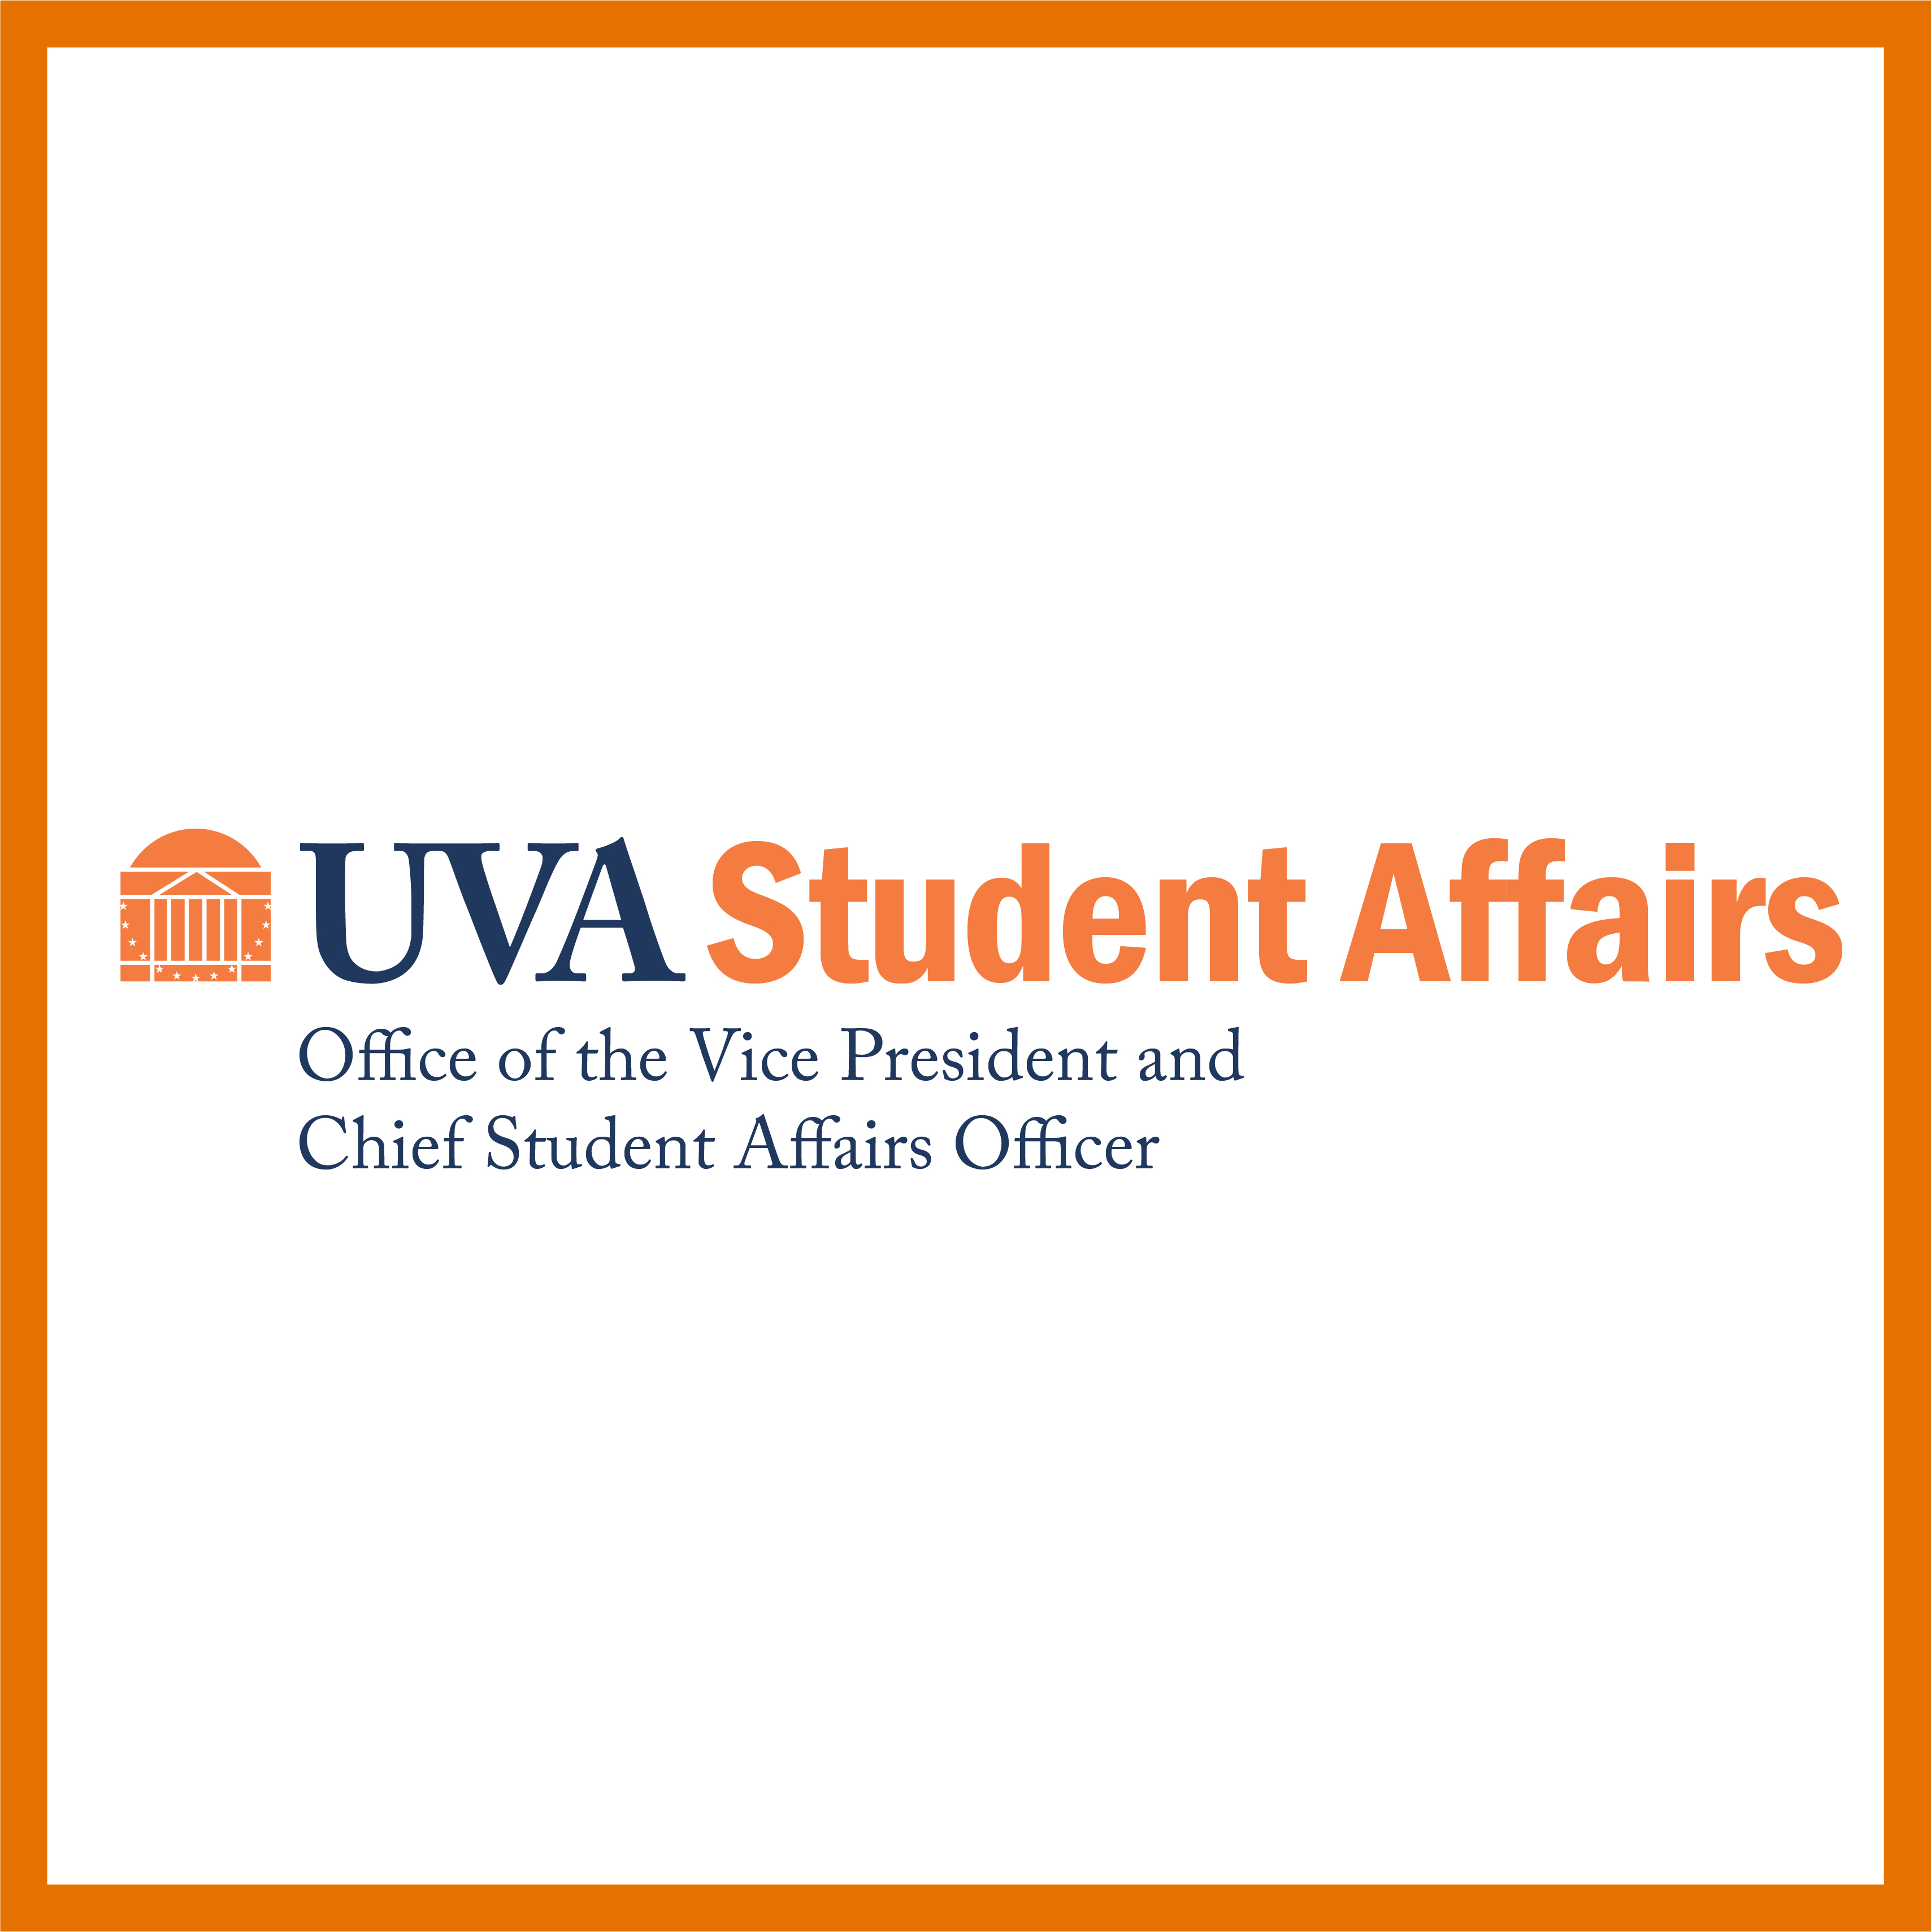 Informal horizontal 2 logo for Student Affairs Office of the Vice President and Chief Student Affairs